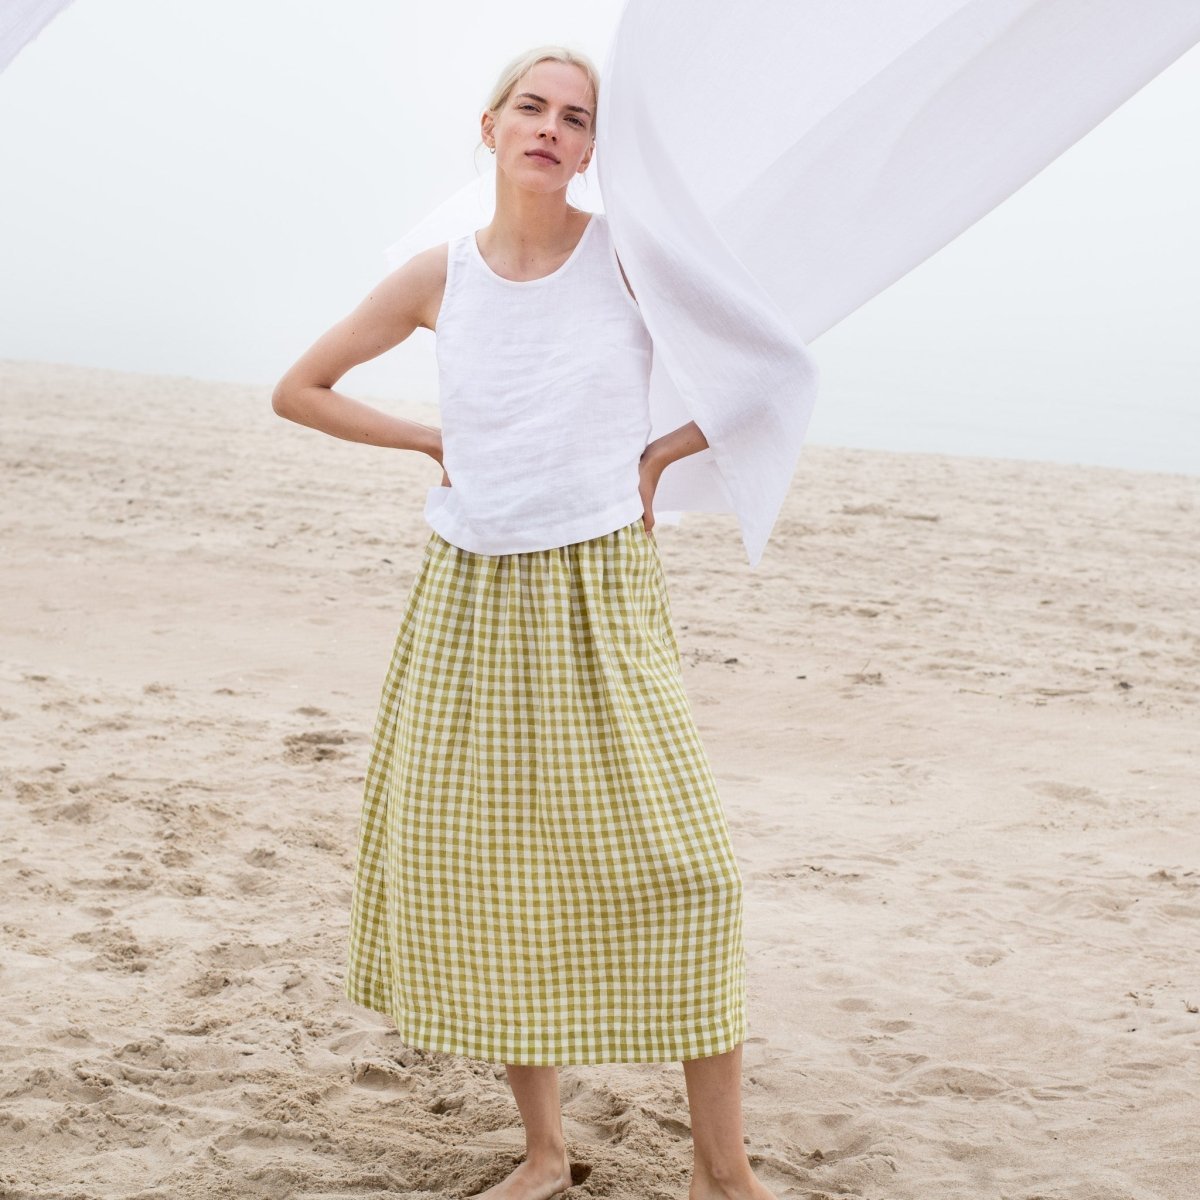 R: SION gathered linen skirt (Size: M; Color: Yellow/Natural) - notPERFECTLINEN